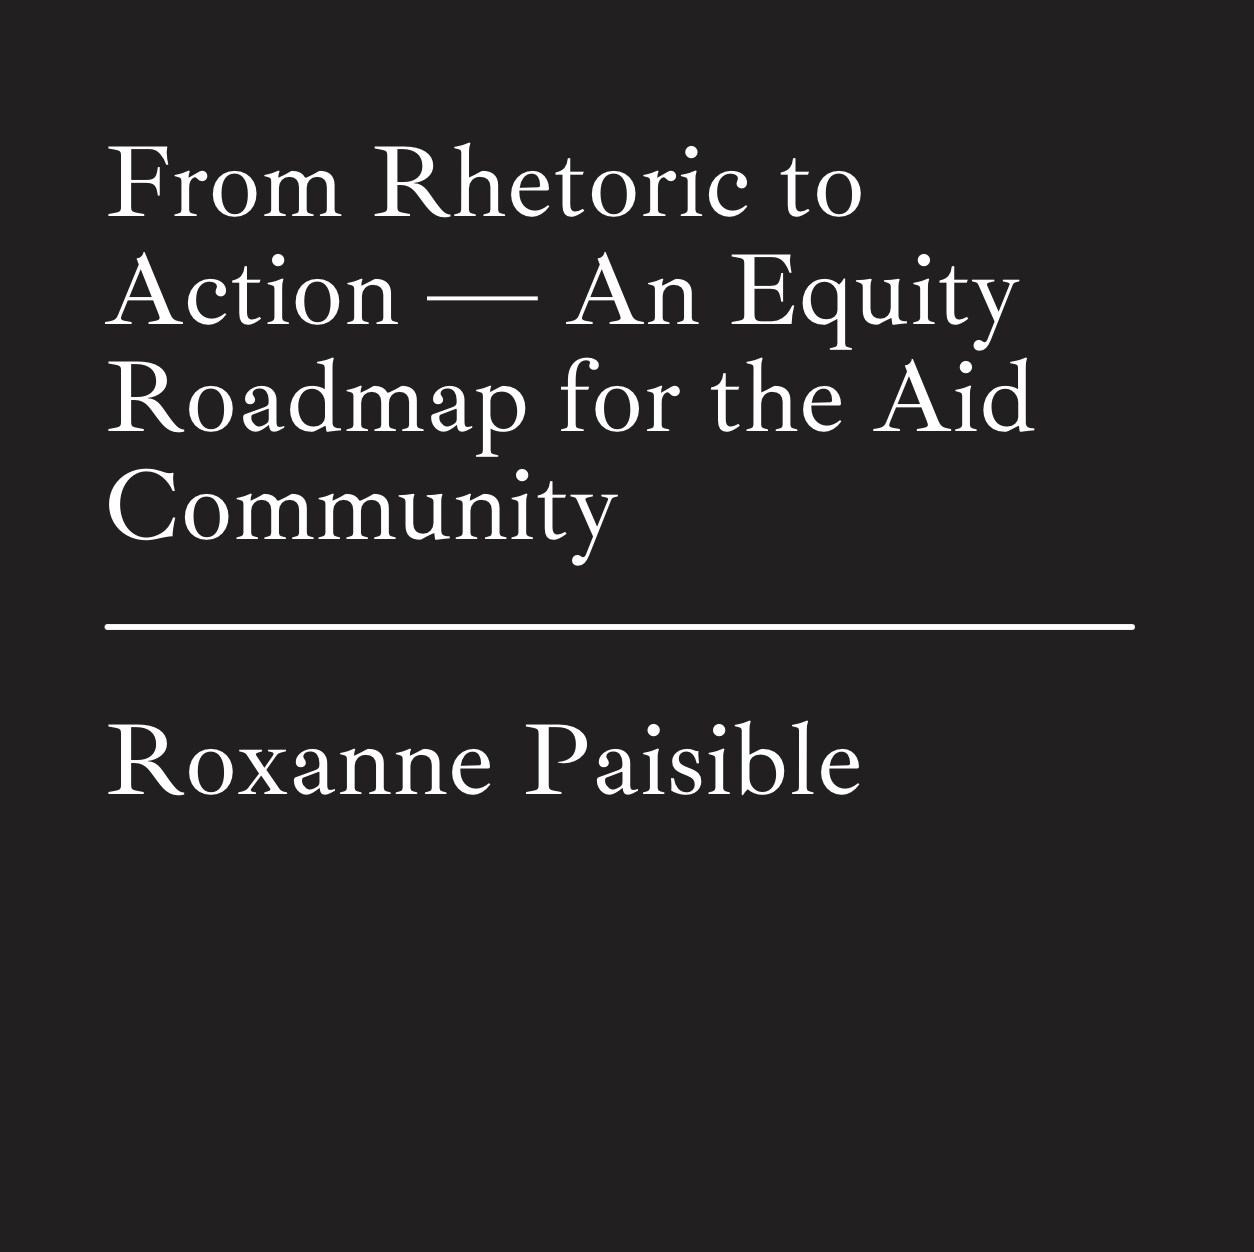 May 4, 2021 | From Rhetoric to Action: An Equity Roadmap for the Aid Community